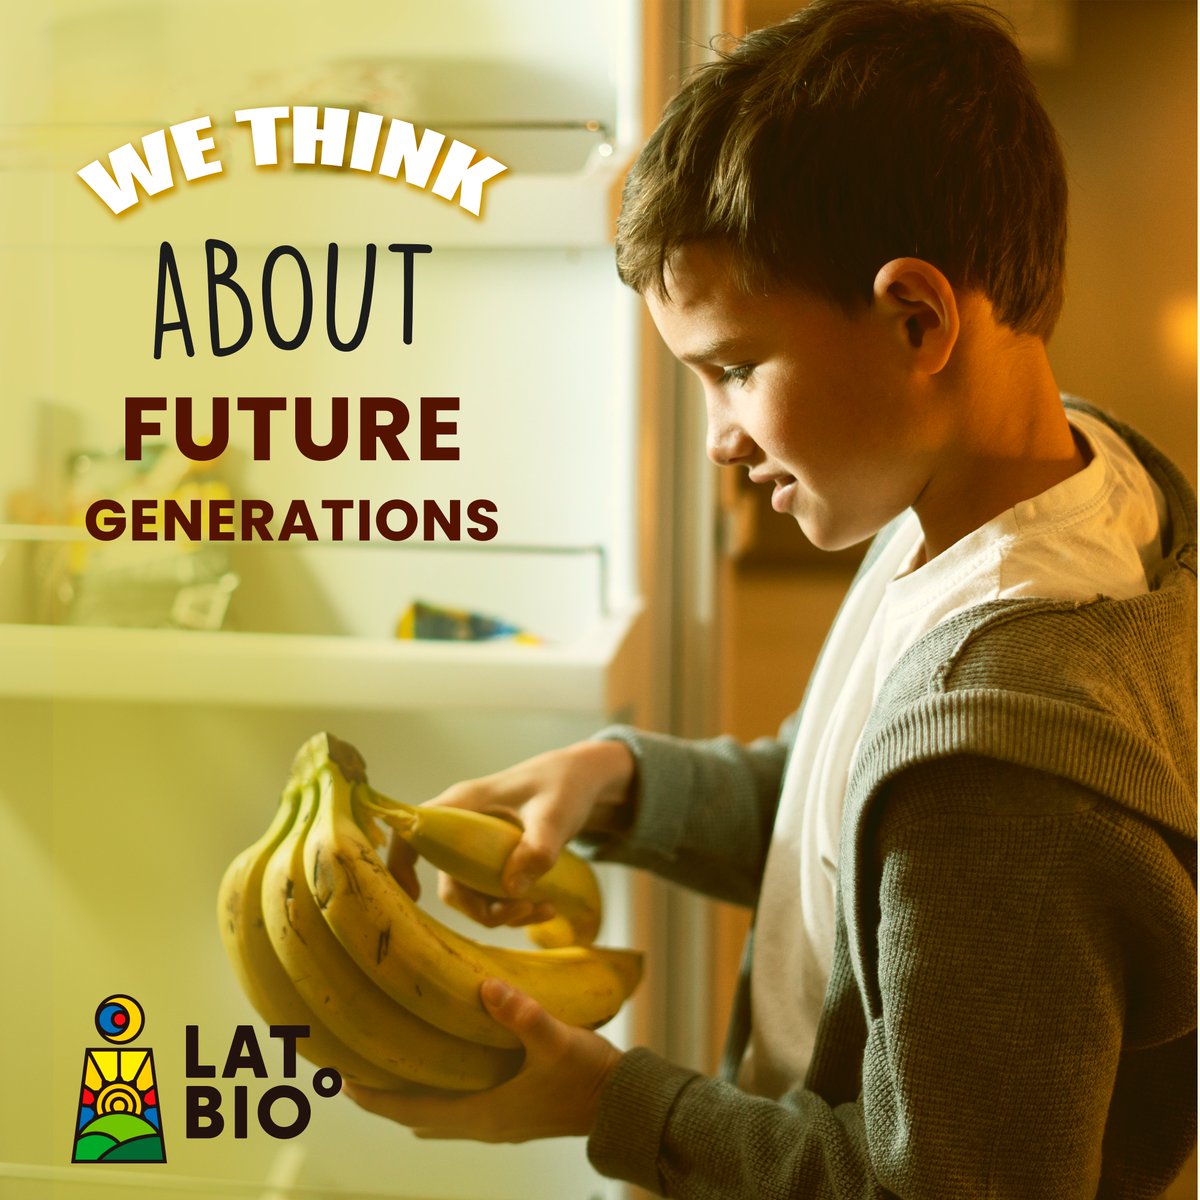 Besides feeding with the best quality food our kids,👌🏼 biodynamic & regenerative organic agriculture benefits the soil, revitalizing and maintaining its fertility for the future generations. 
#latbio #ecuador🇪🇨 #bananademeter #biodynamicagriculture